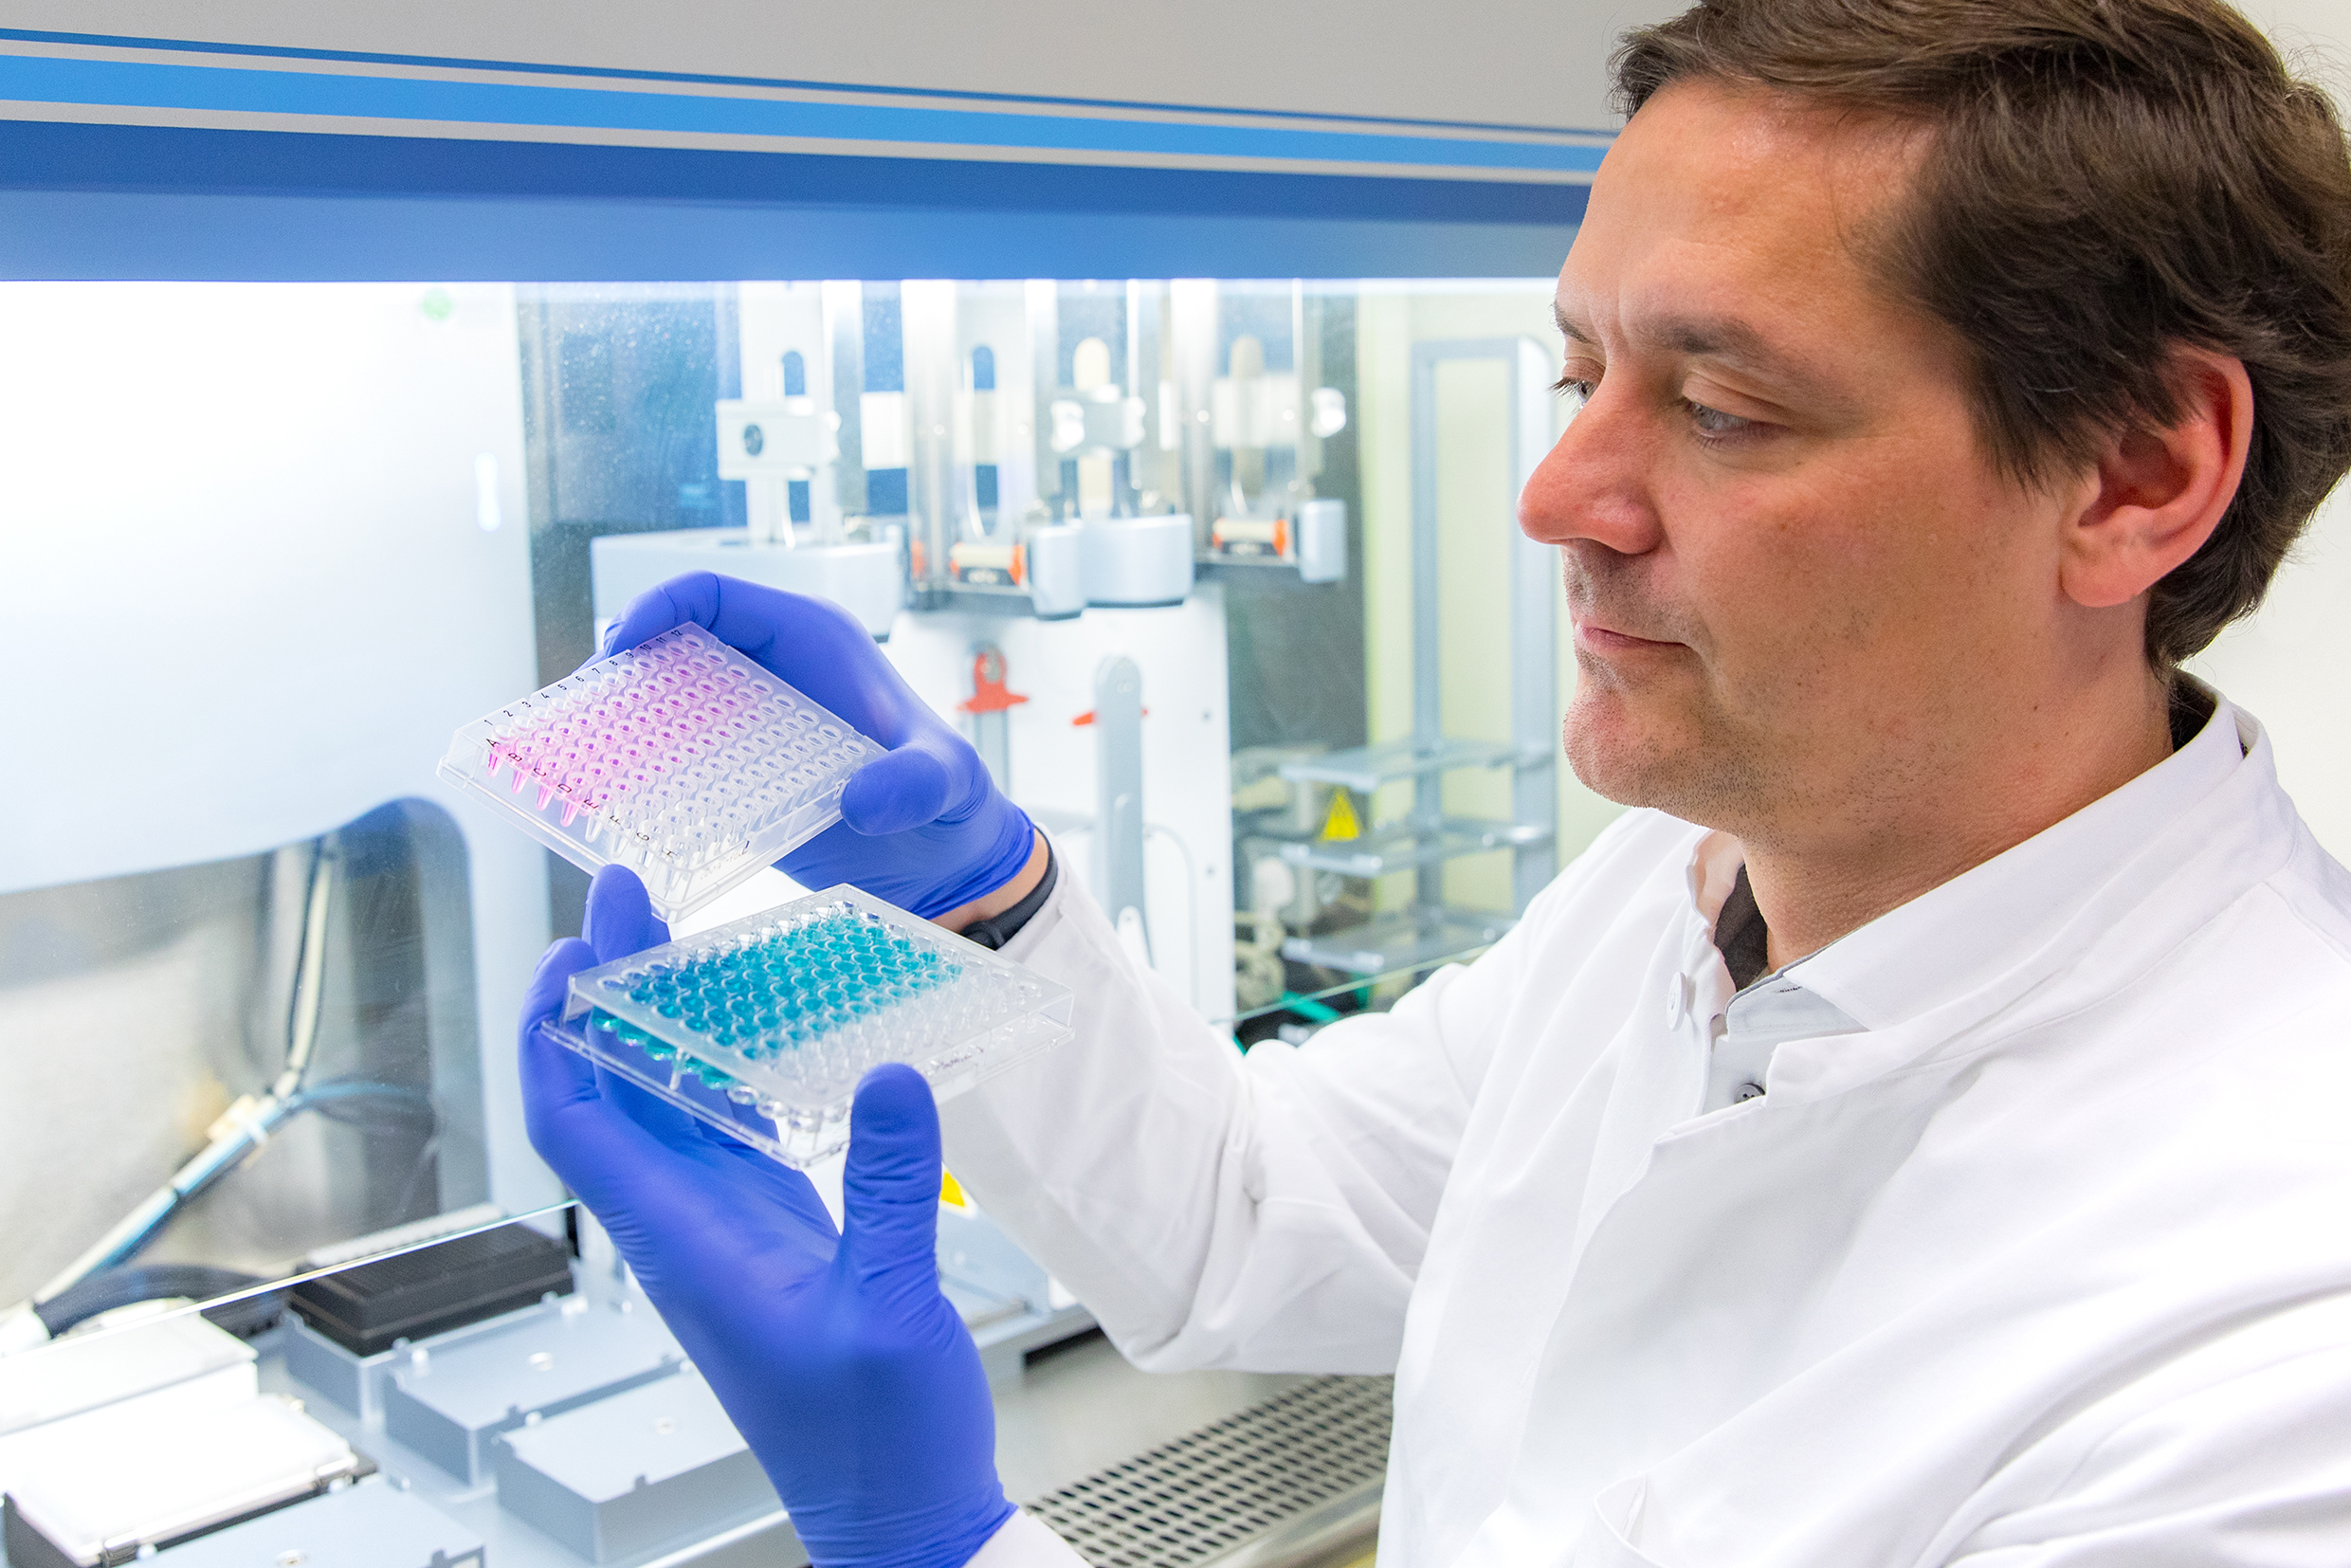 Professor Dr. Christian Bär stands in front of a pipetting robot and holds two micropipetting plates in his hands